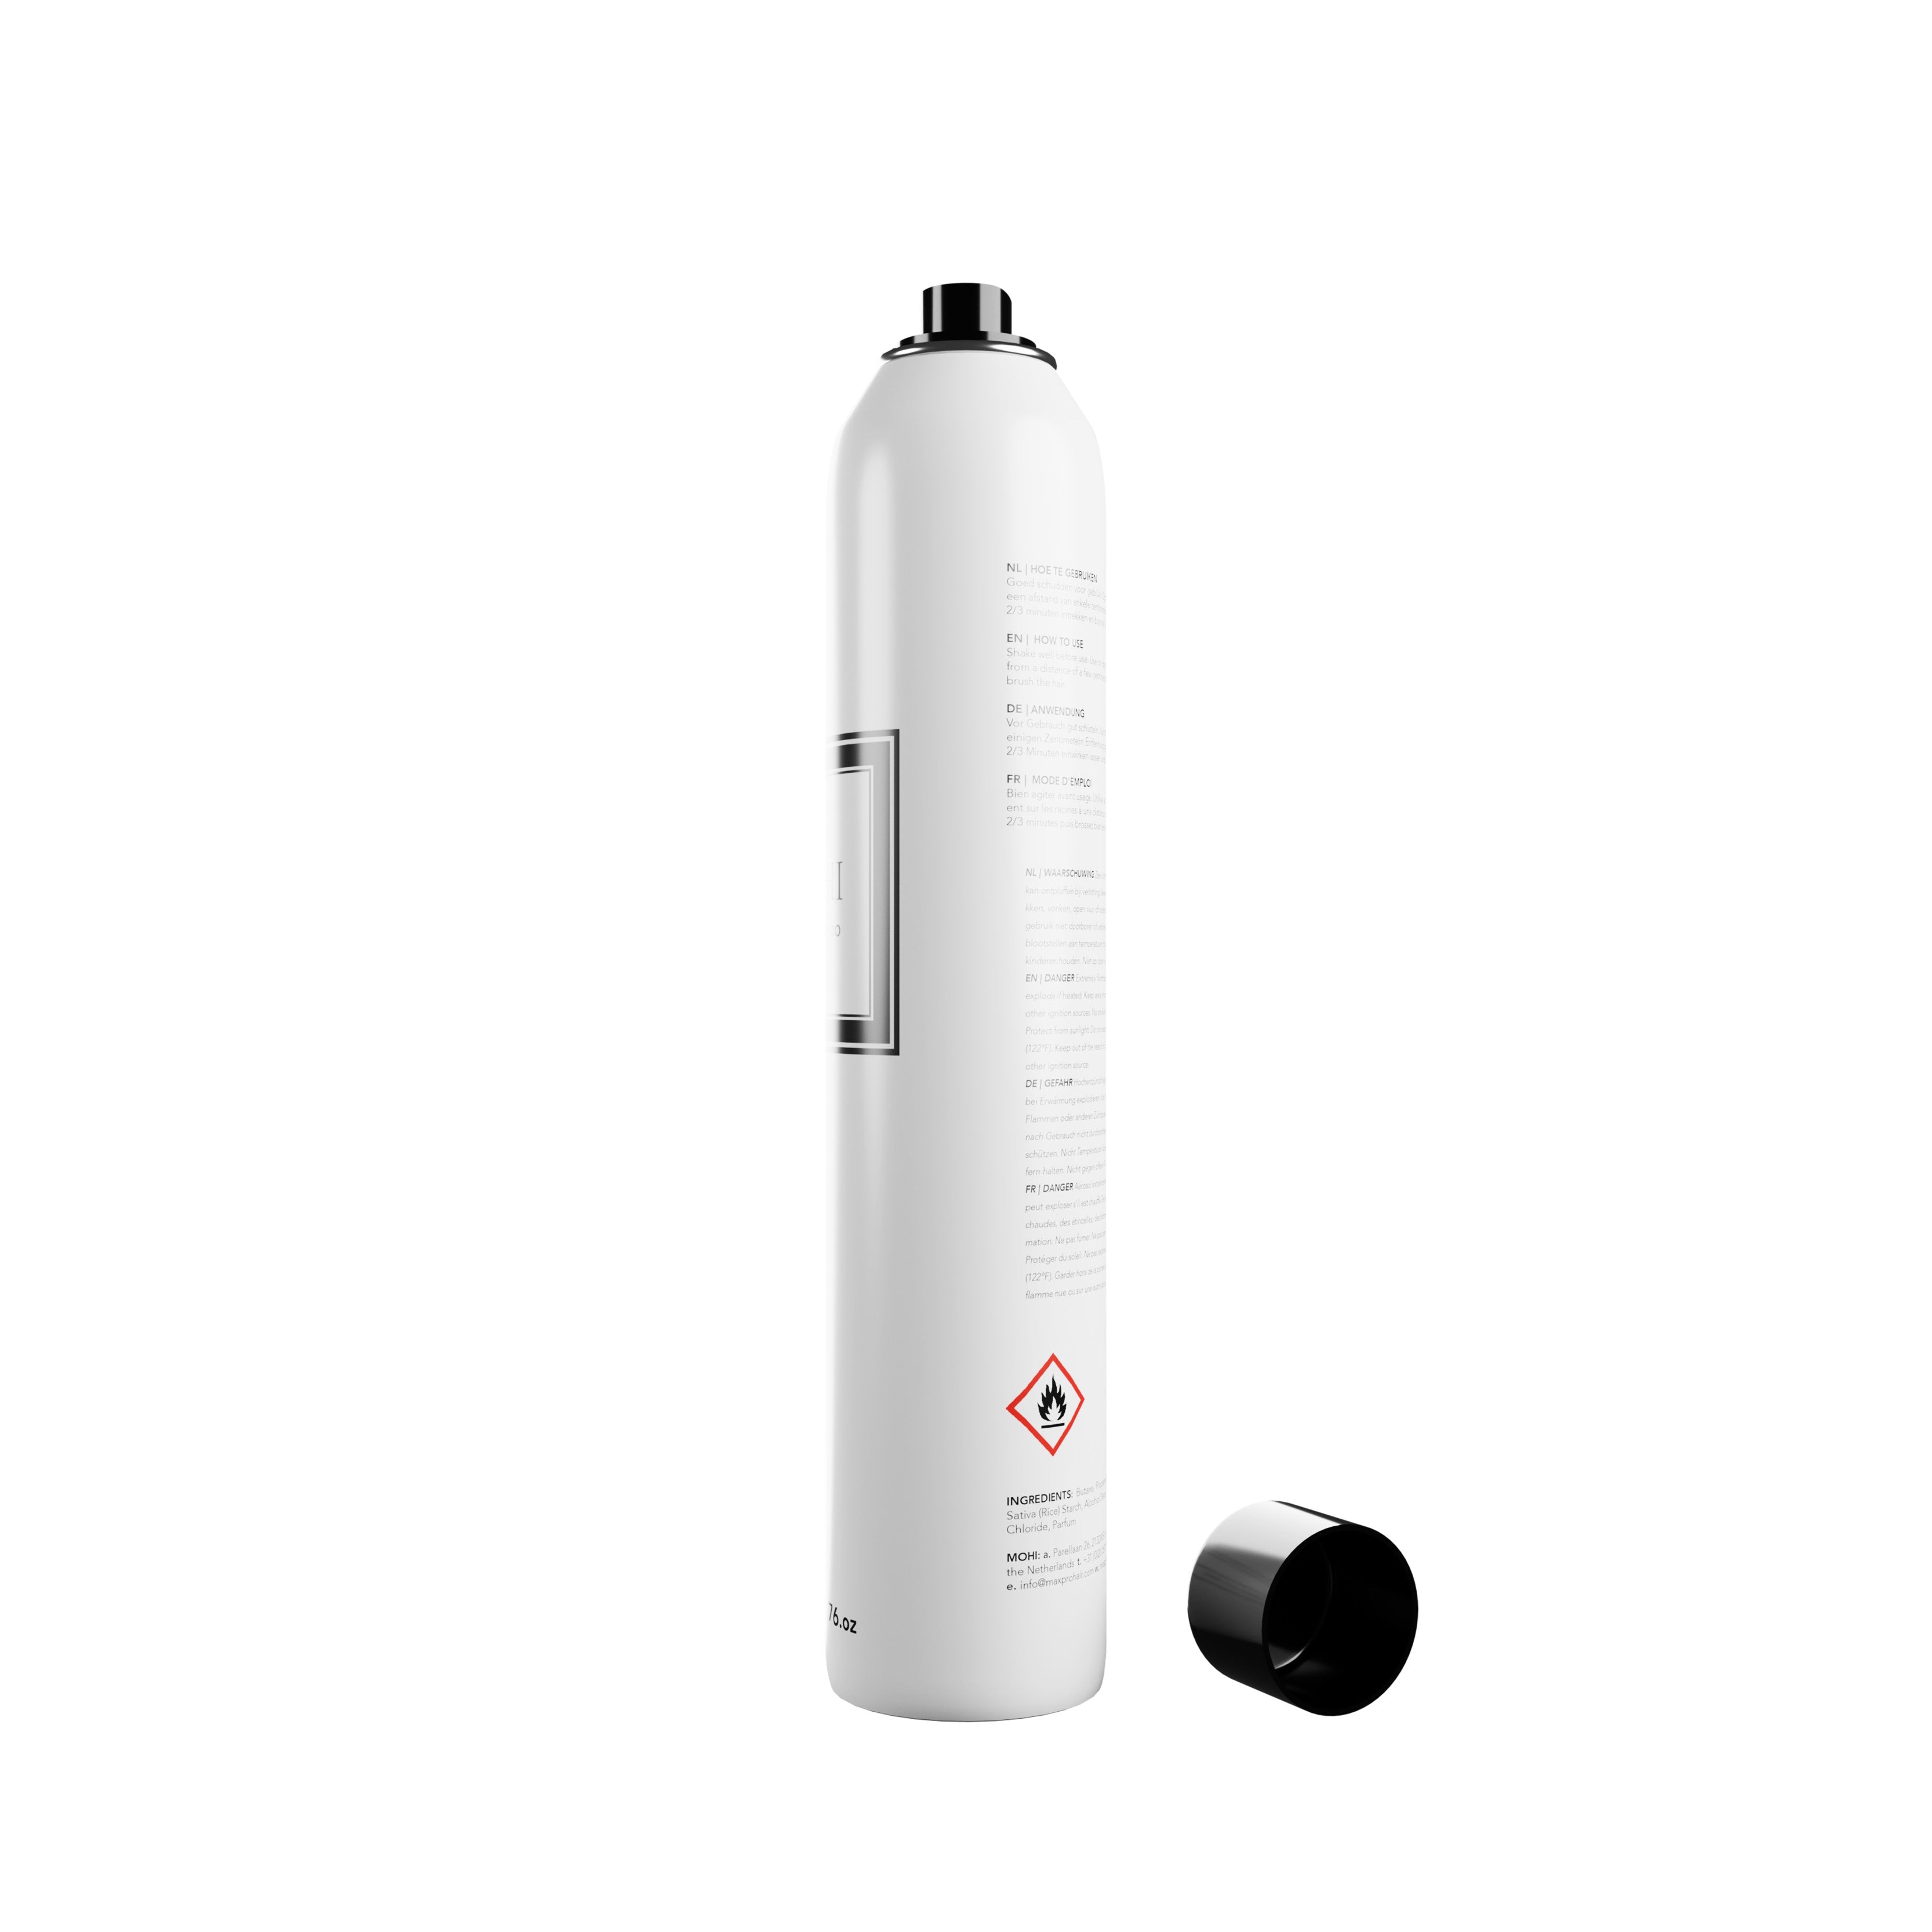 OUTLET MOHI Dry Shampoo 200ml - Max Pro x MOHI